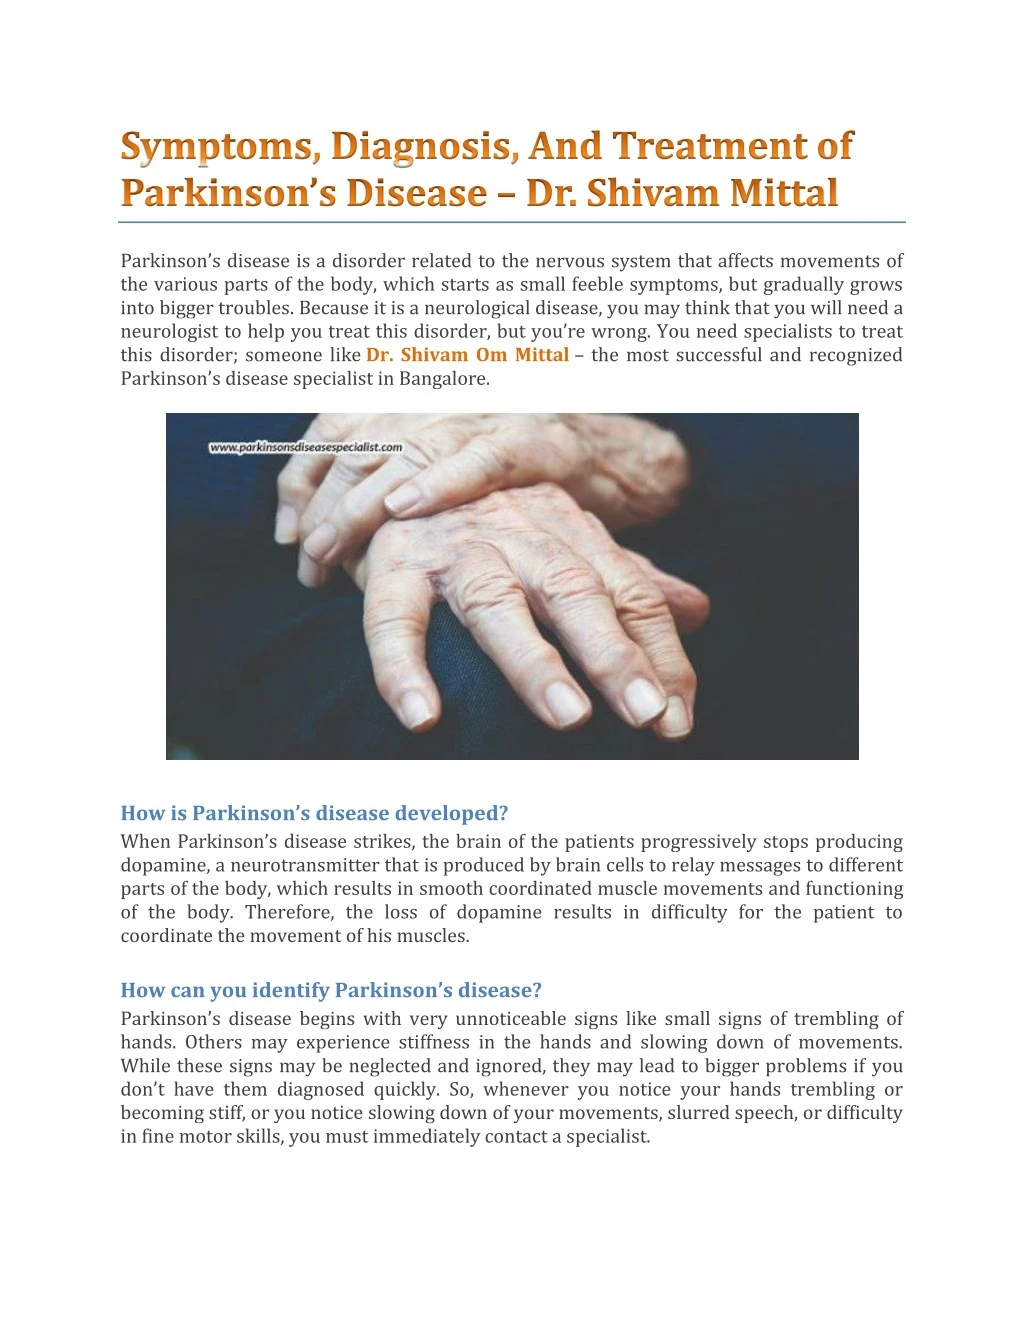 parkinson s disease is a disorder related